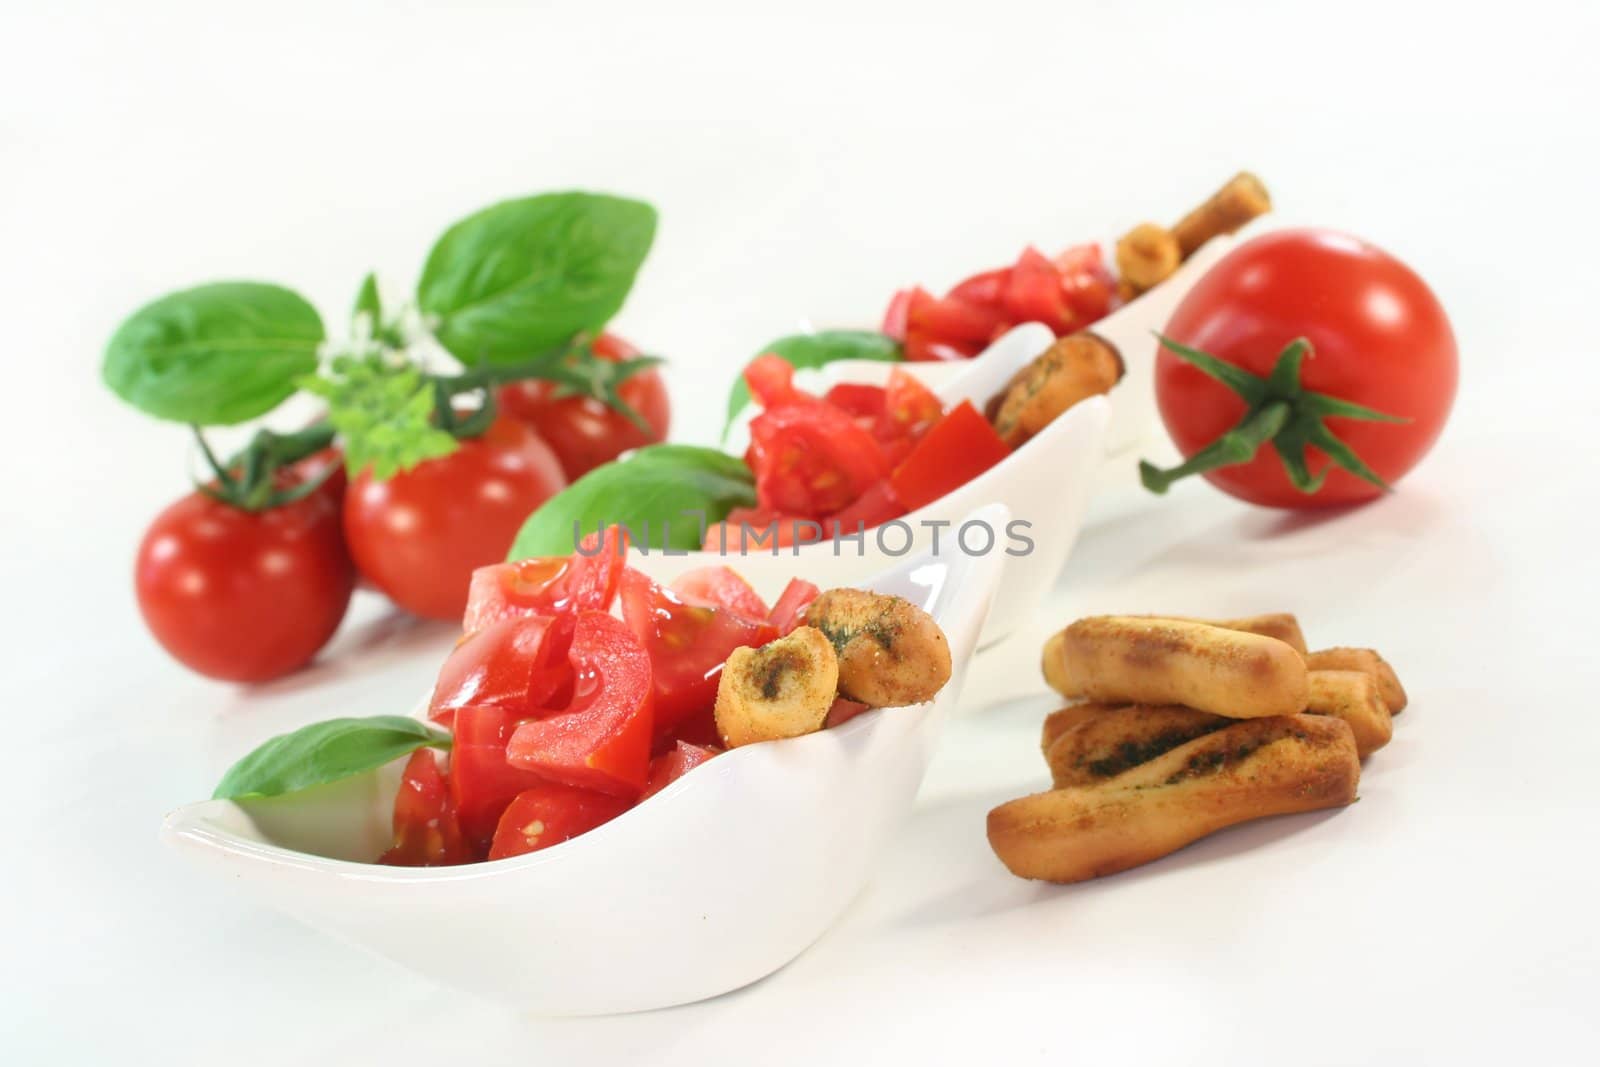 some bread sticks, tomatoes and basil on a light background
